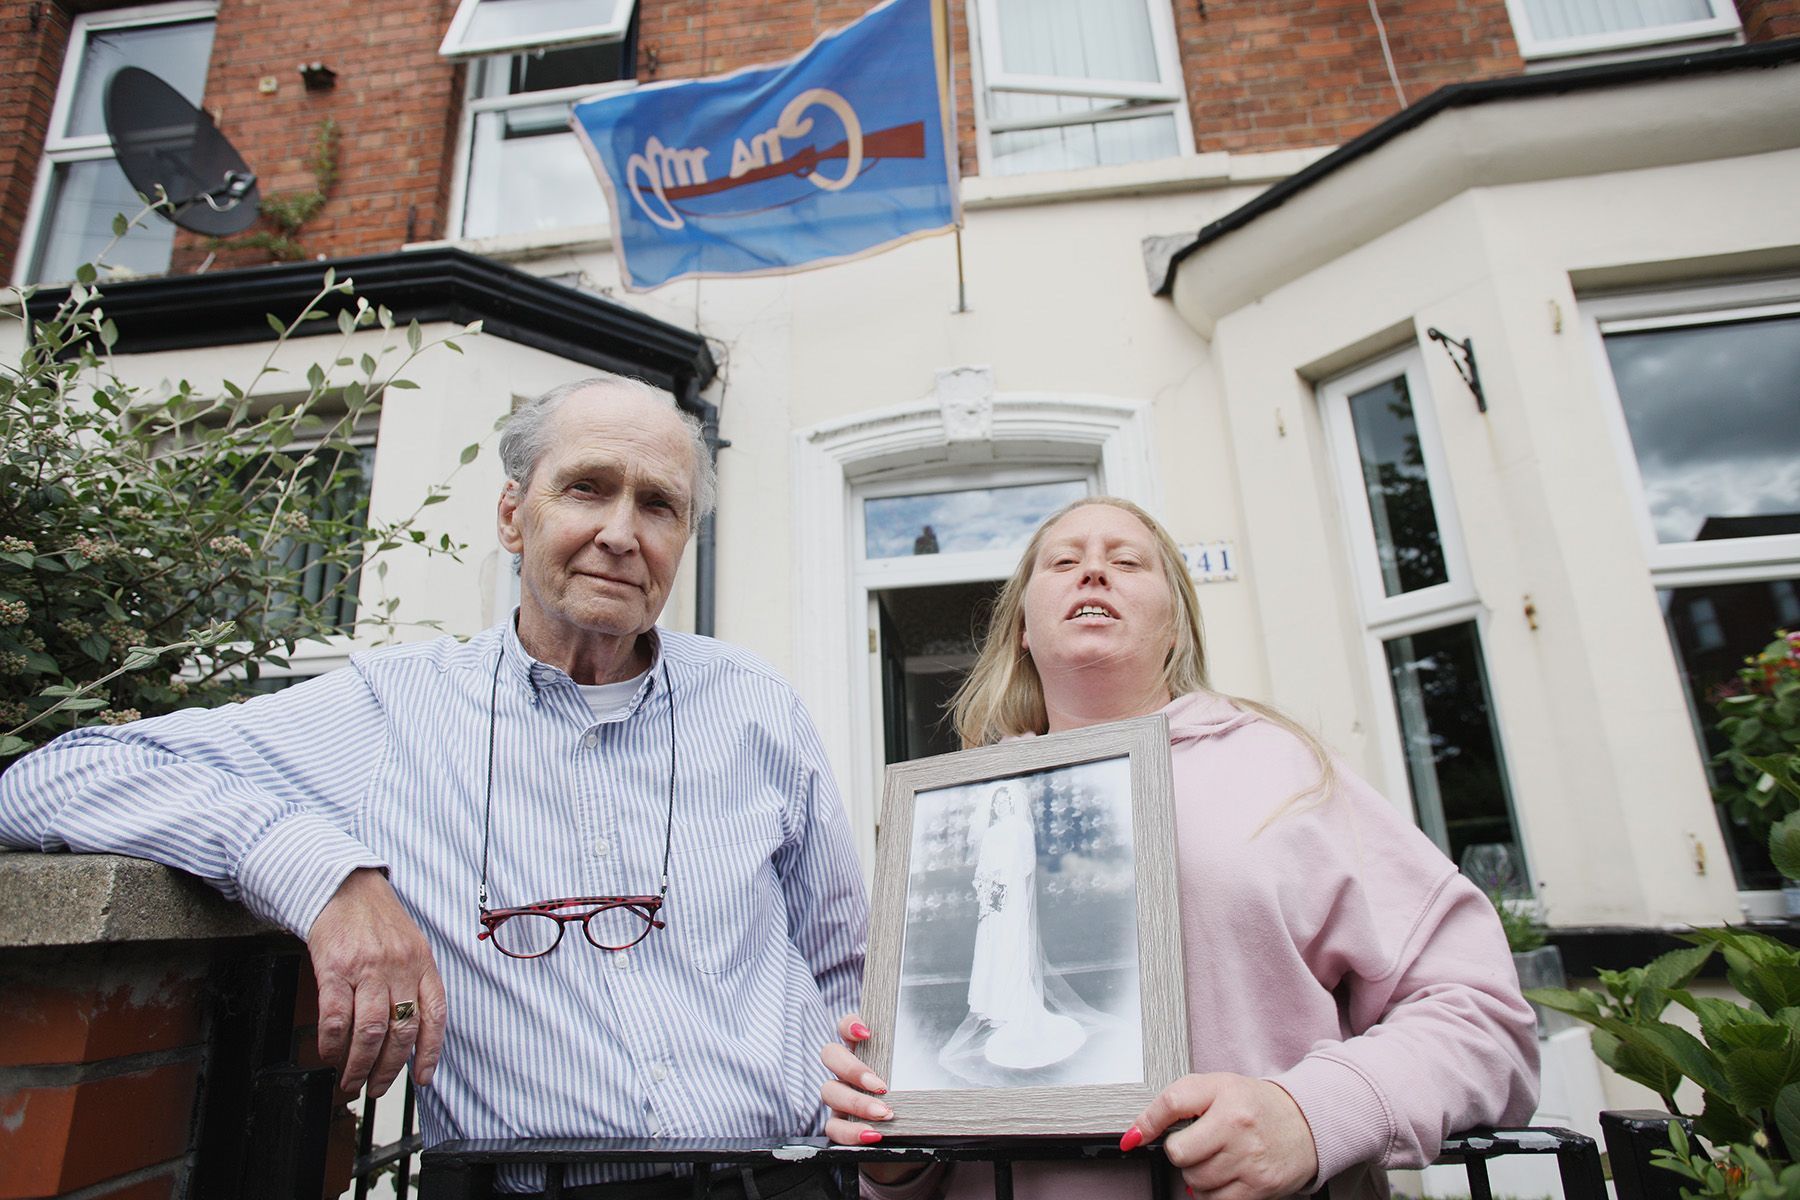 REST IN PEACE: Campaigner Jim McCabe passed away on Saturday 